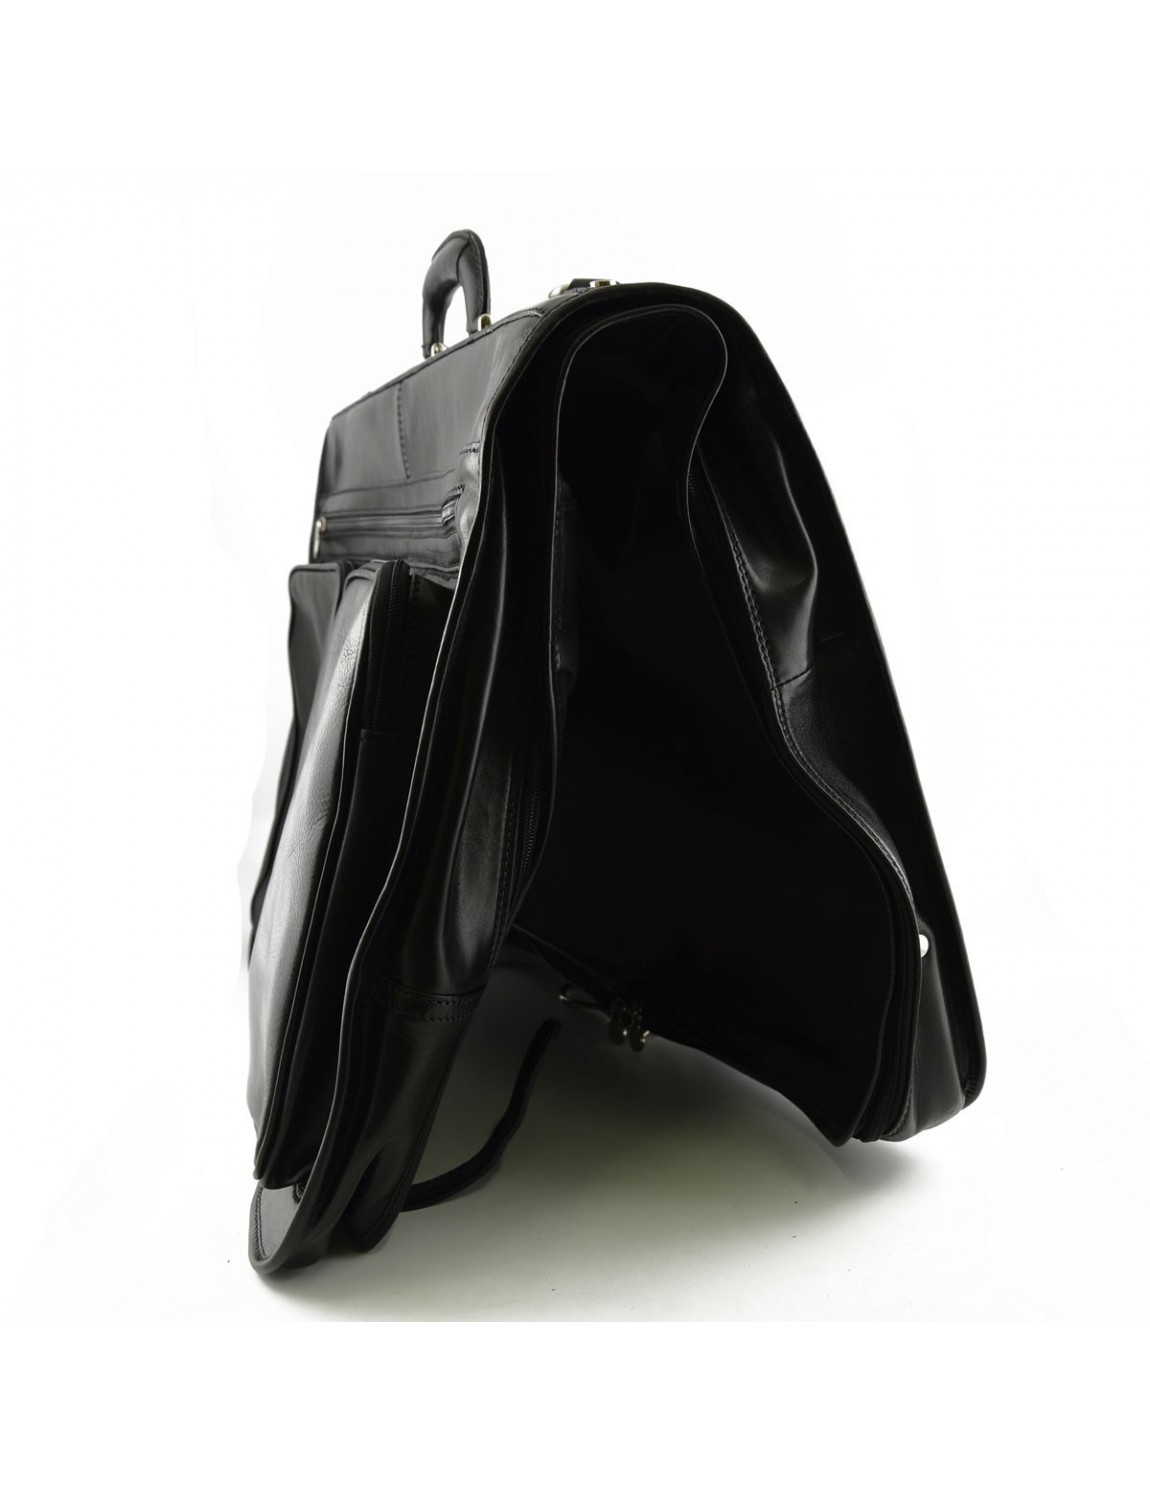 Leather garment bag with 2 hangers, equipped with a hook for hanging and a detachable shoulder strap with shoulder rest.